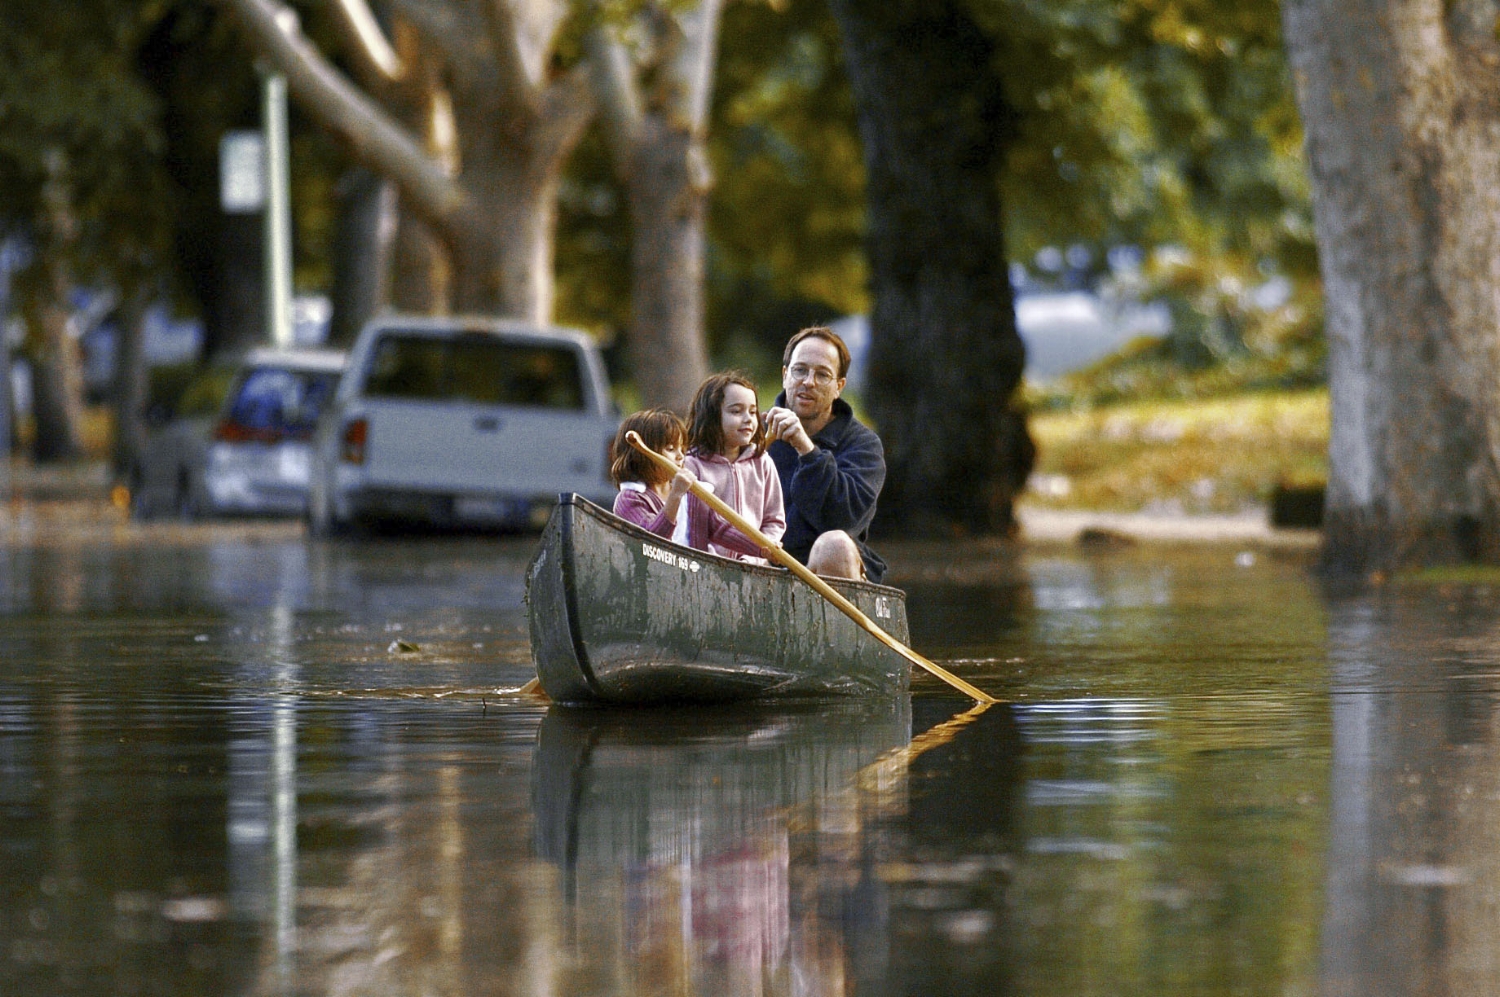  Lily Brown 5, left, her sister Emma Brown 6, and their father Doug Brown paddle a canoe up 38th Street near Folsom Blvd in Sacramento on Sunday September 19, 2004. Unexpected heavy rain flooded many parts of the midtown, and downtown areas of Sacram